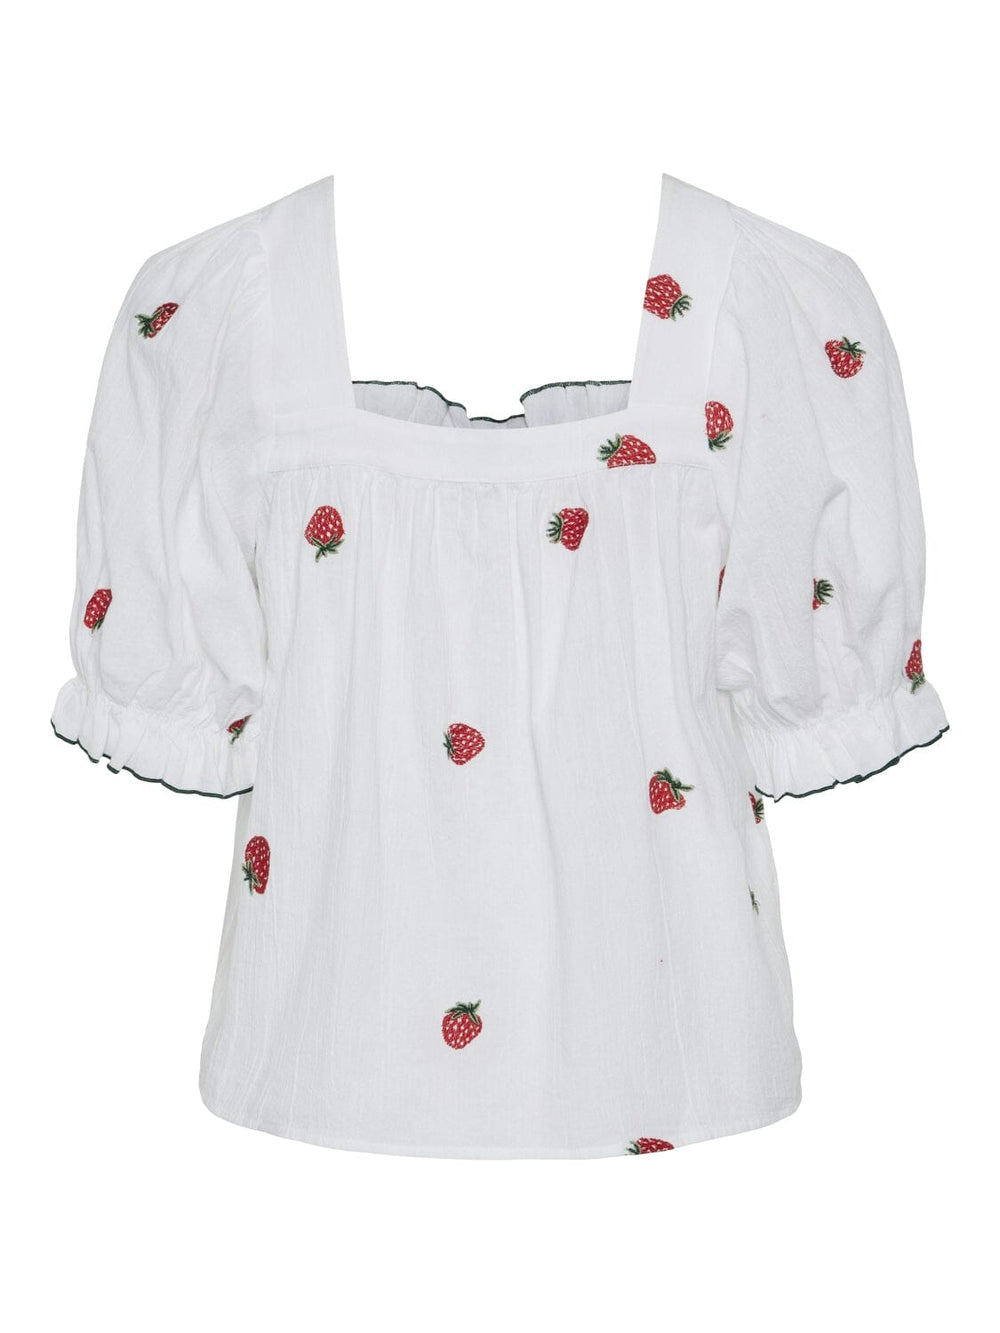 Pieces - Pcselena Ss Square Neck Top - 4625481 Bright White Strawberries T-shirts 